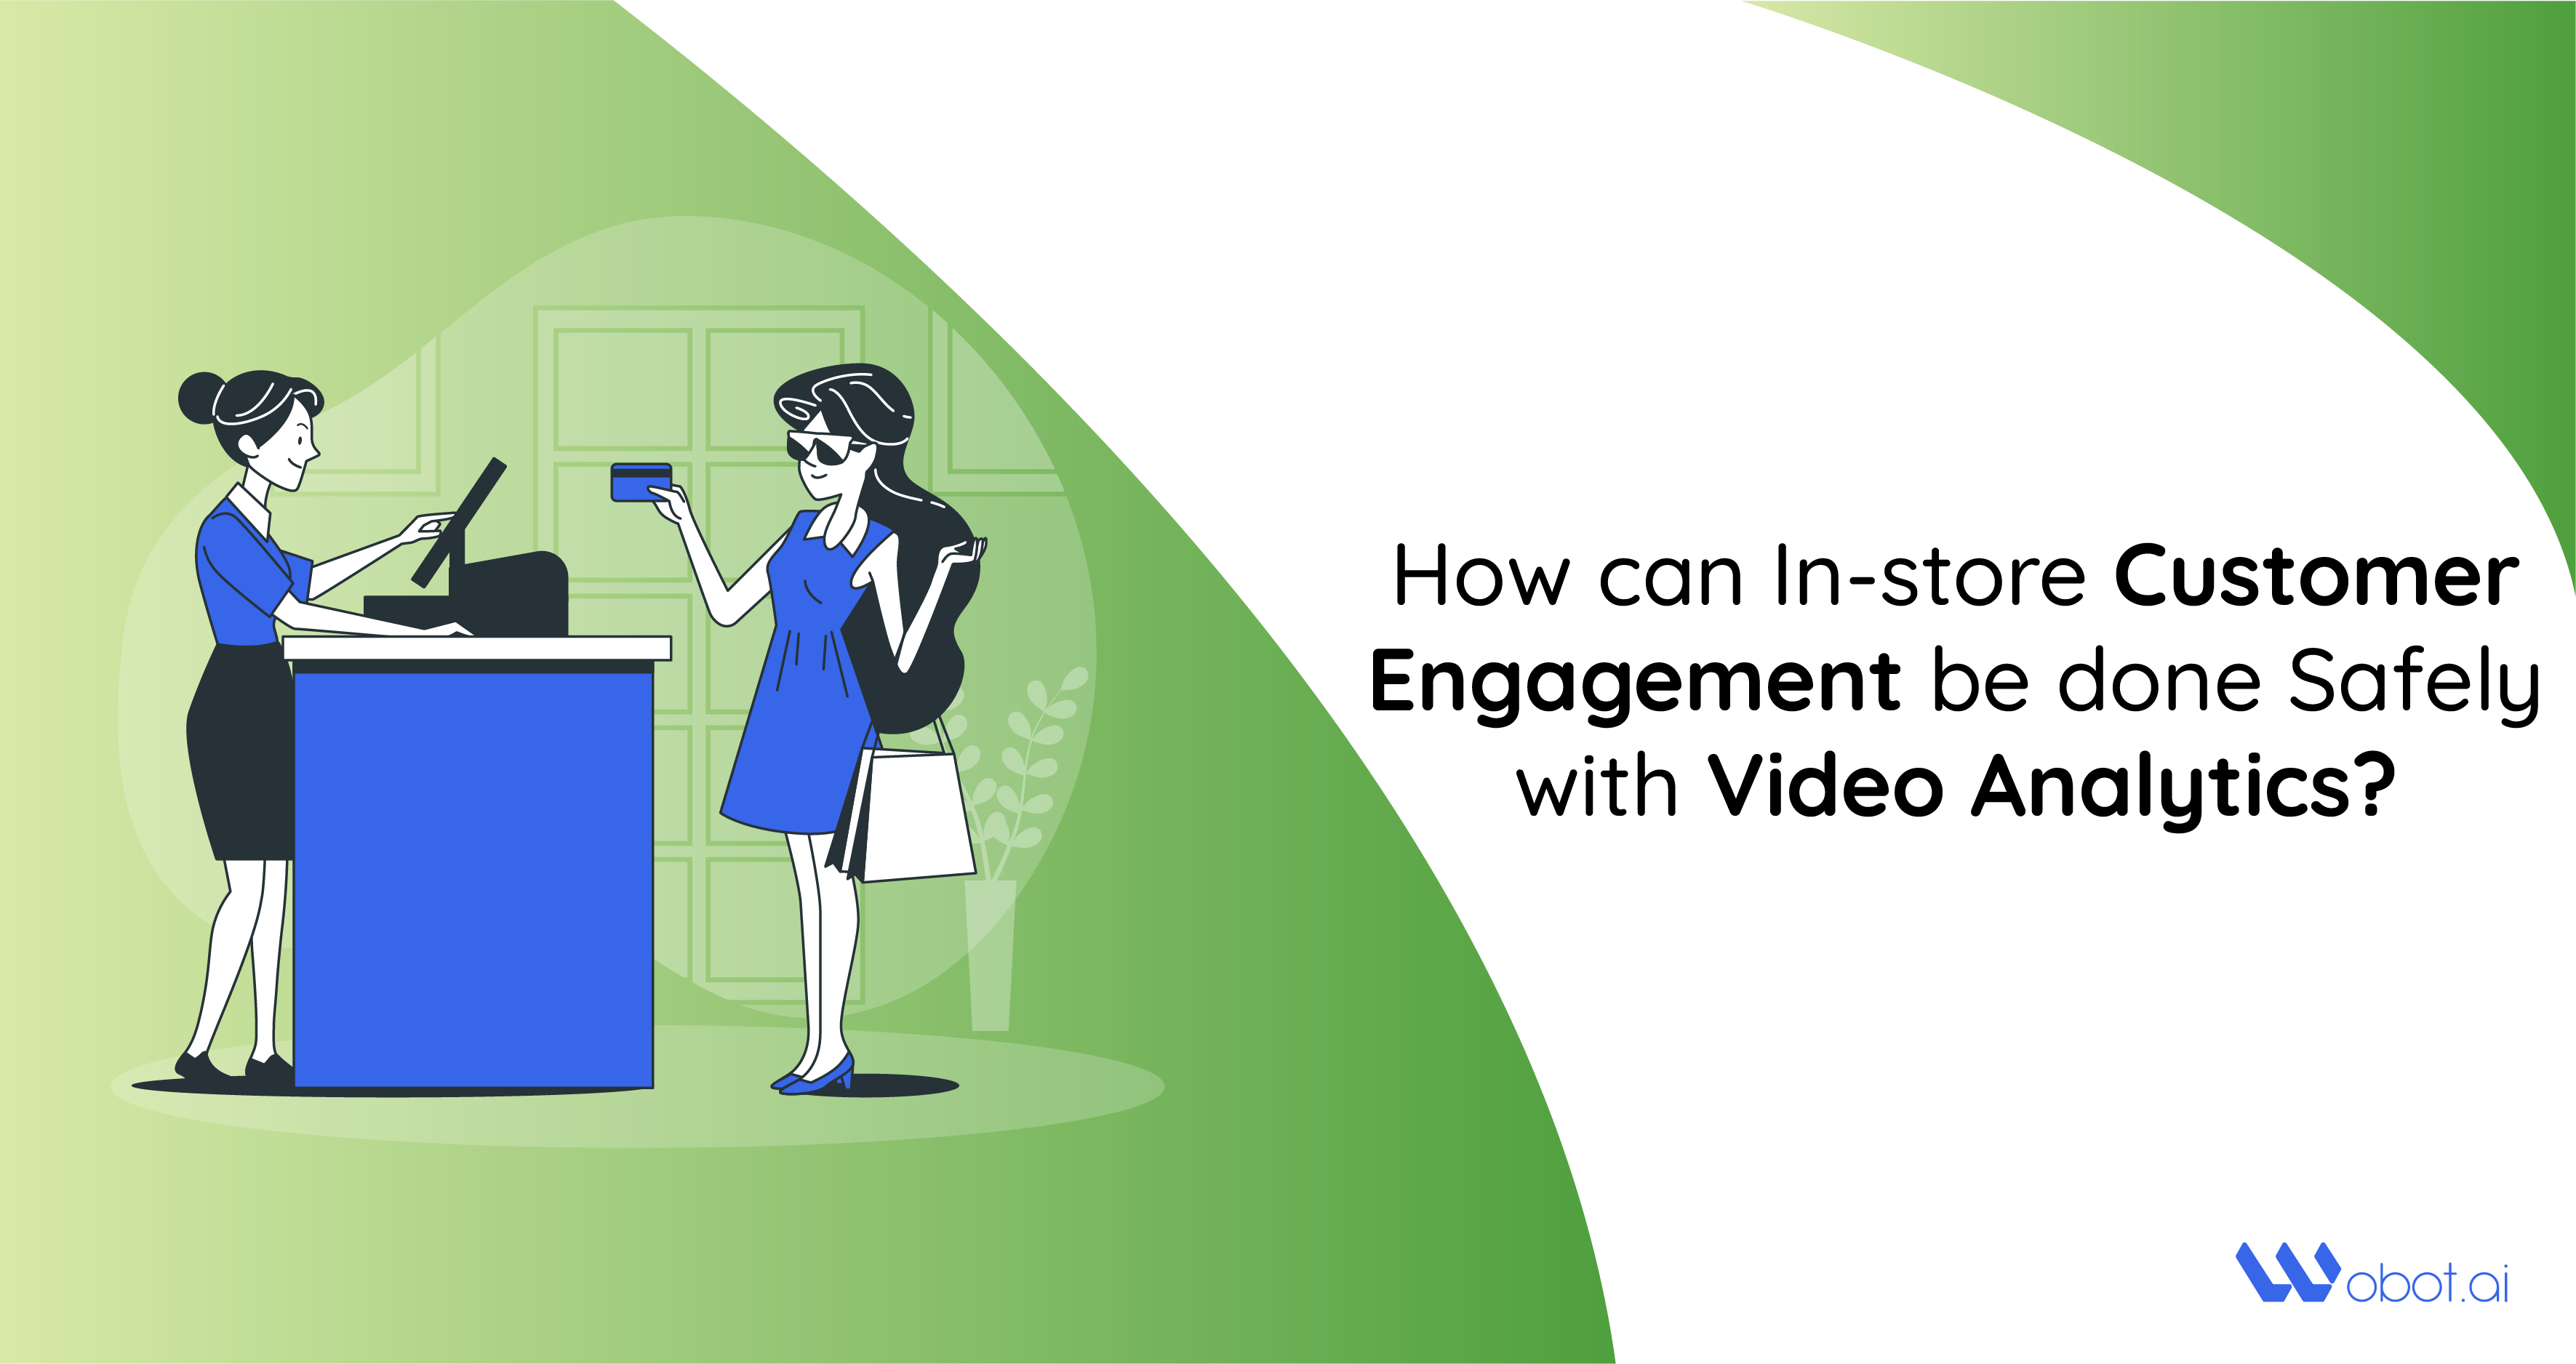 How can In-store Customer Engagement be done Safely with Video Analytics?